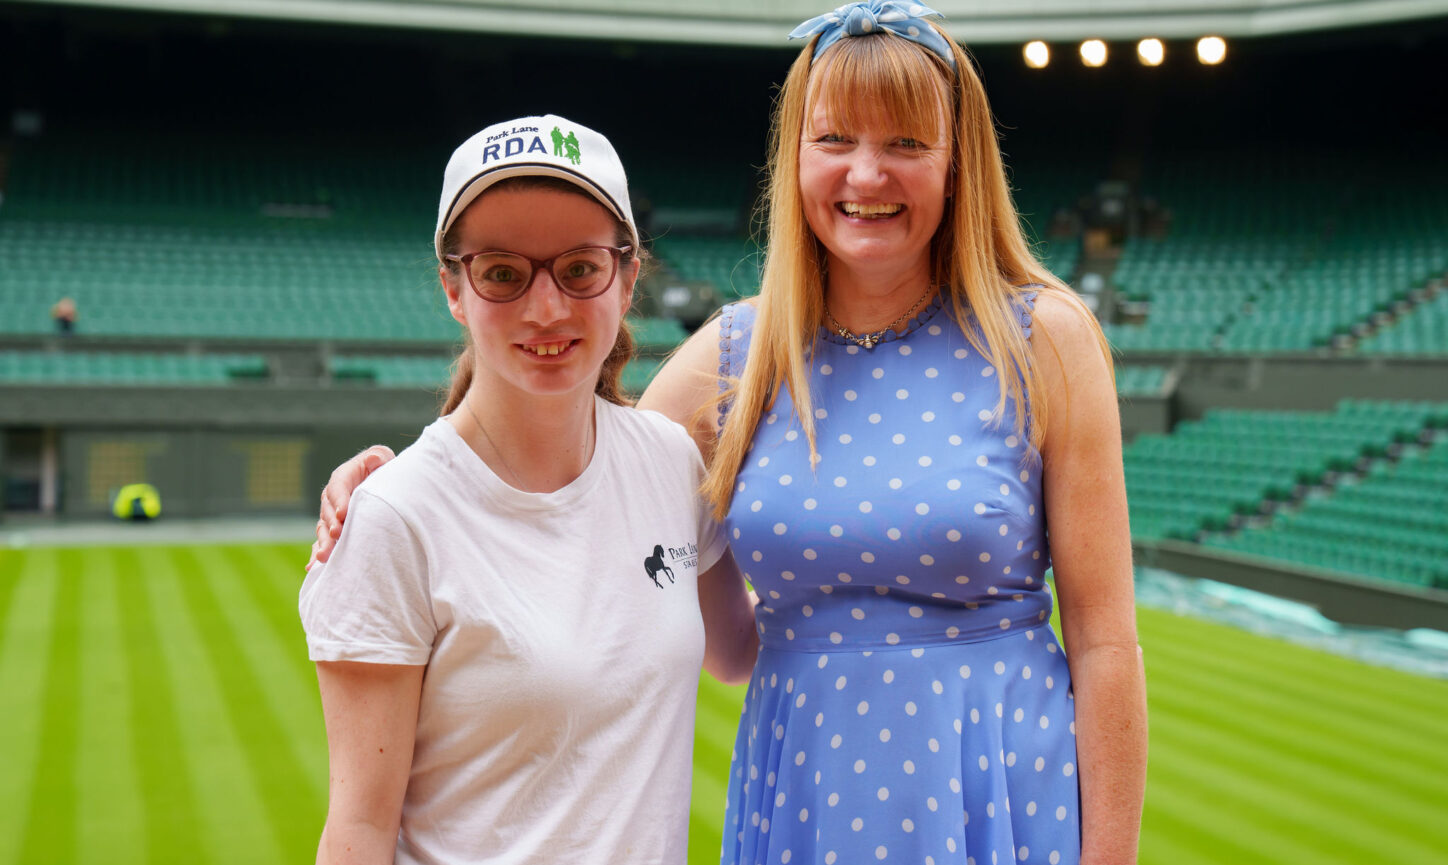 RDA participant Philippa George stands with Park Lane Stables RDA Group Chair Natalie O'Rourke against the backdrop of Wimbledon Centre Court.